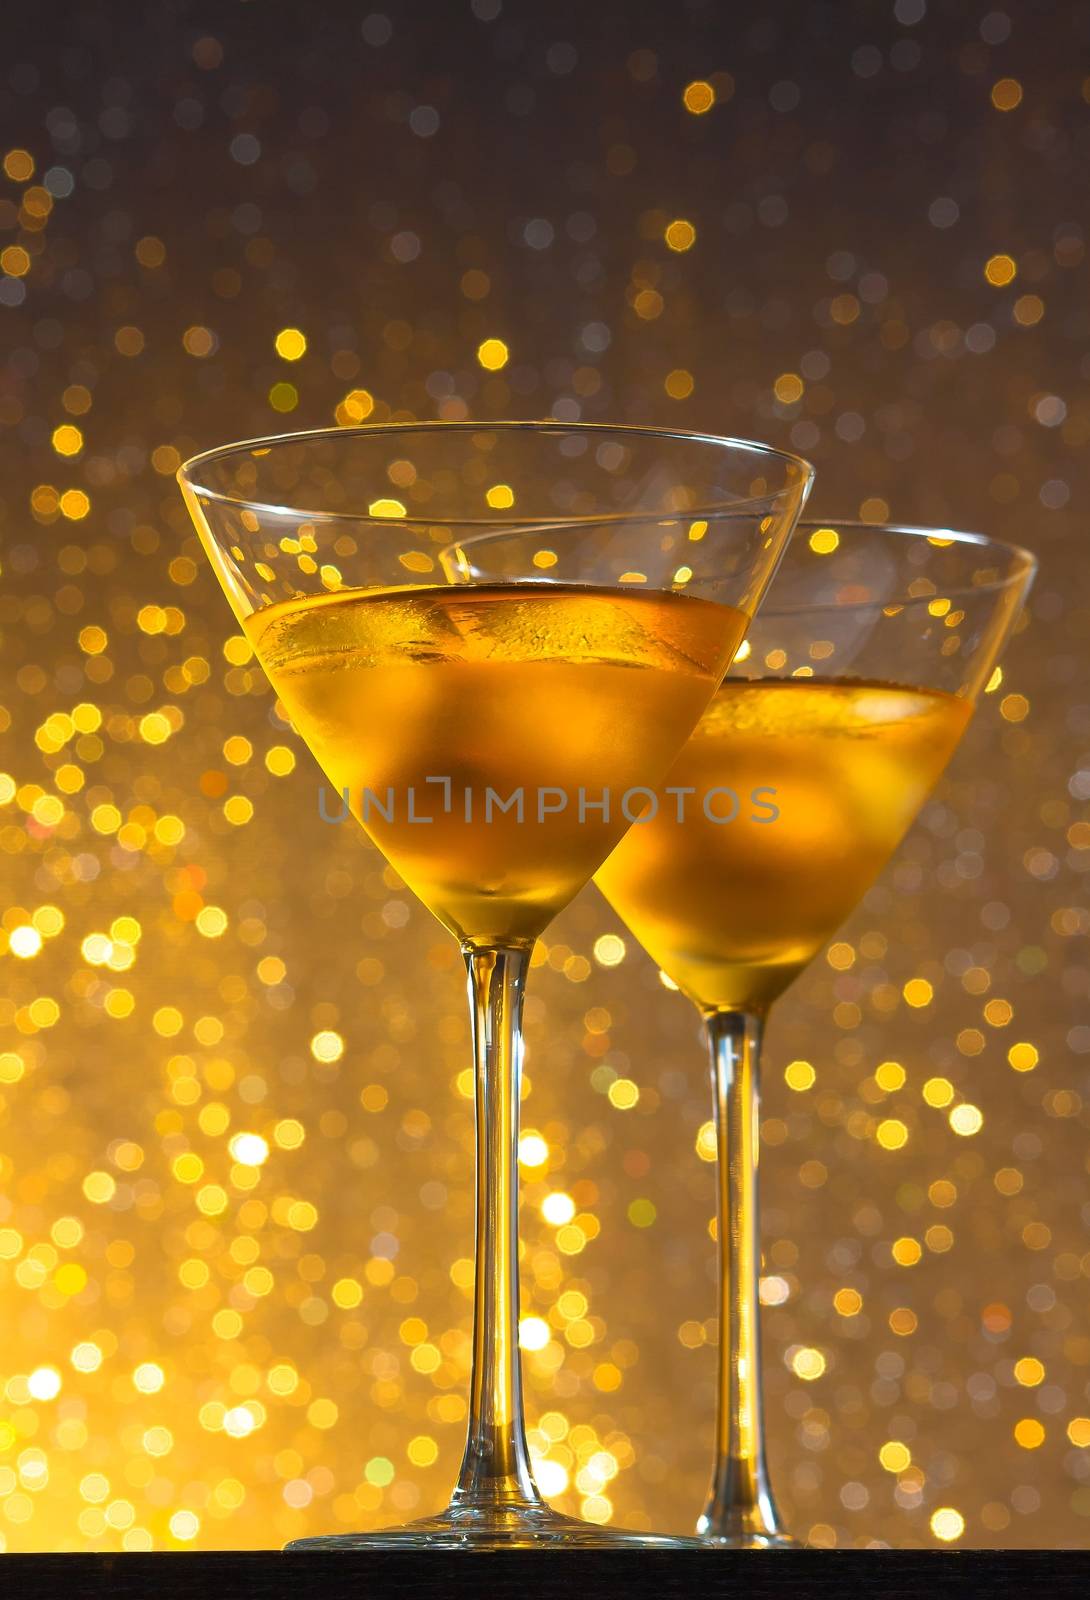 view from below of glasses of fresh cocktail with ice on golden tint light background on bar table